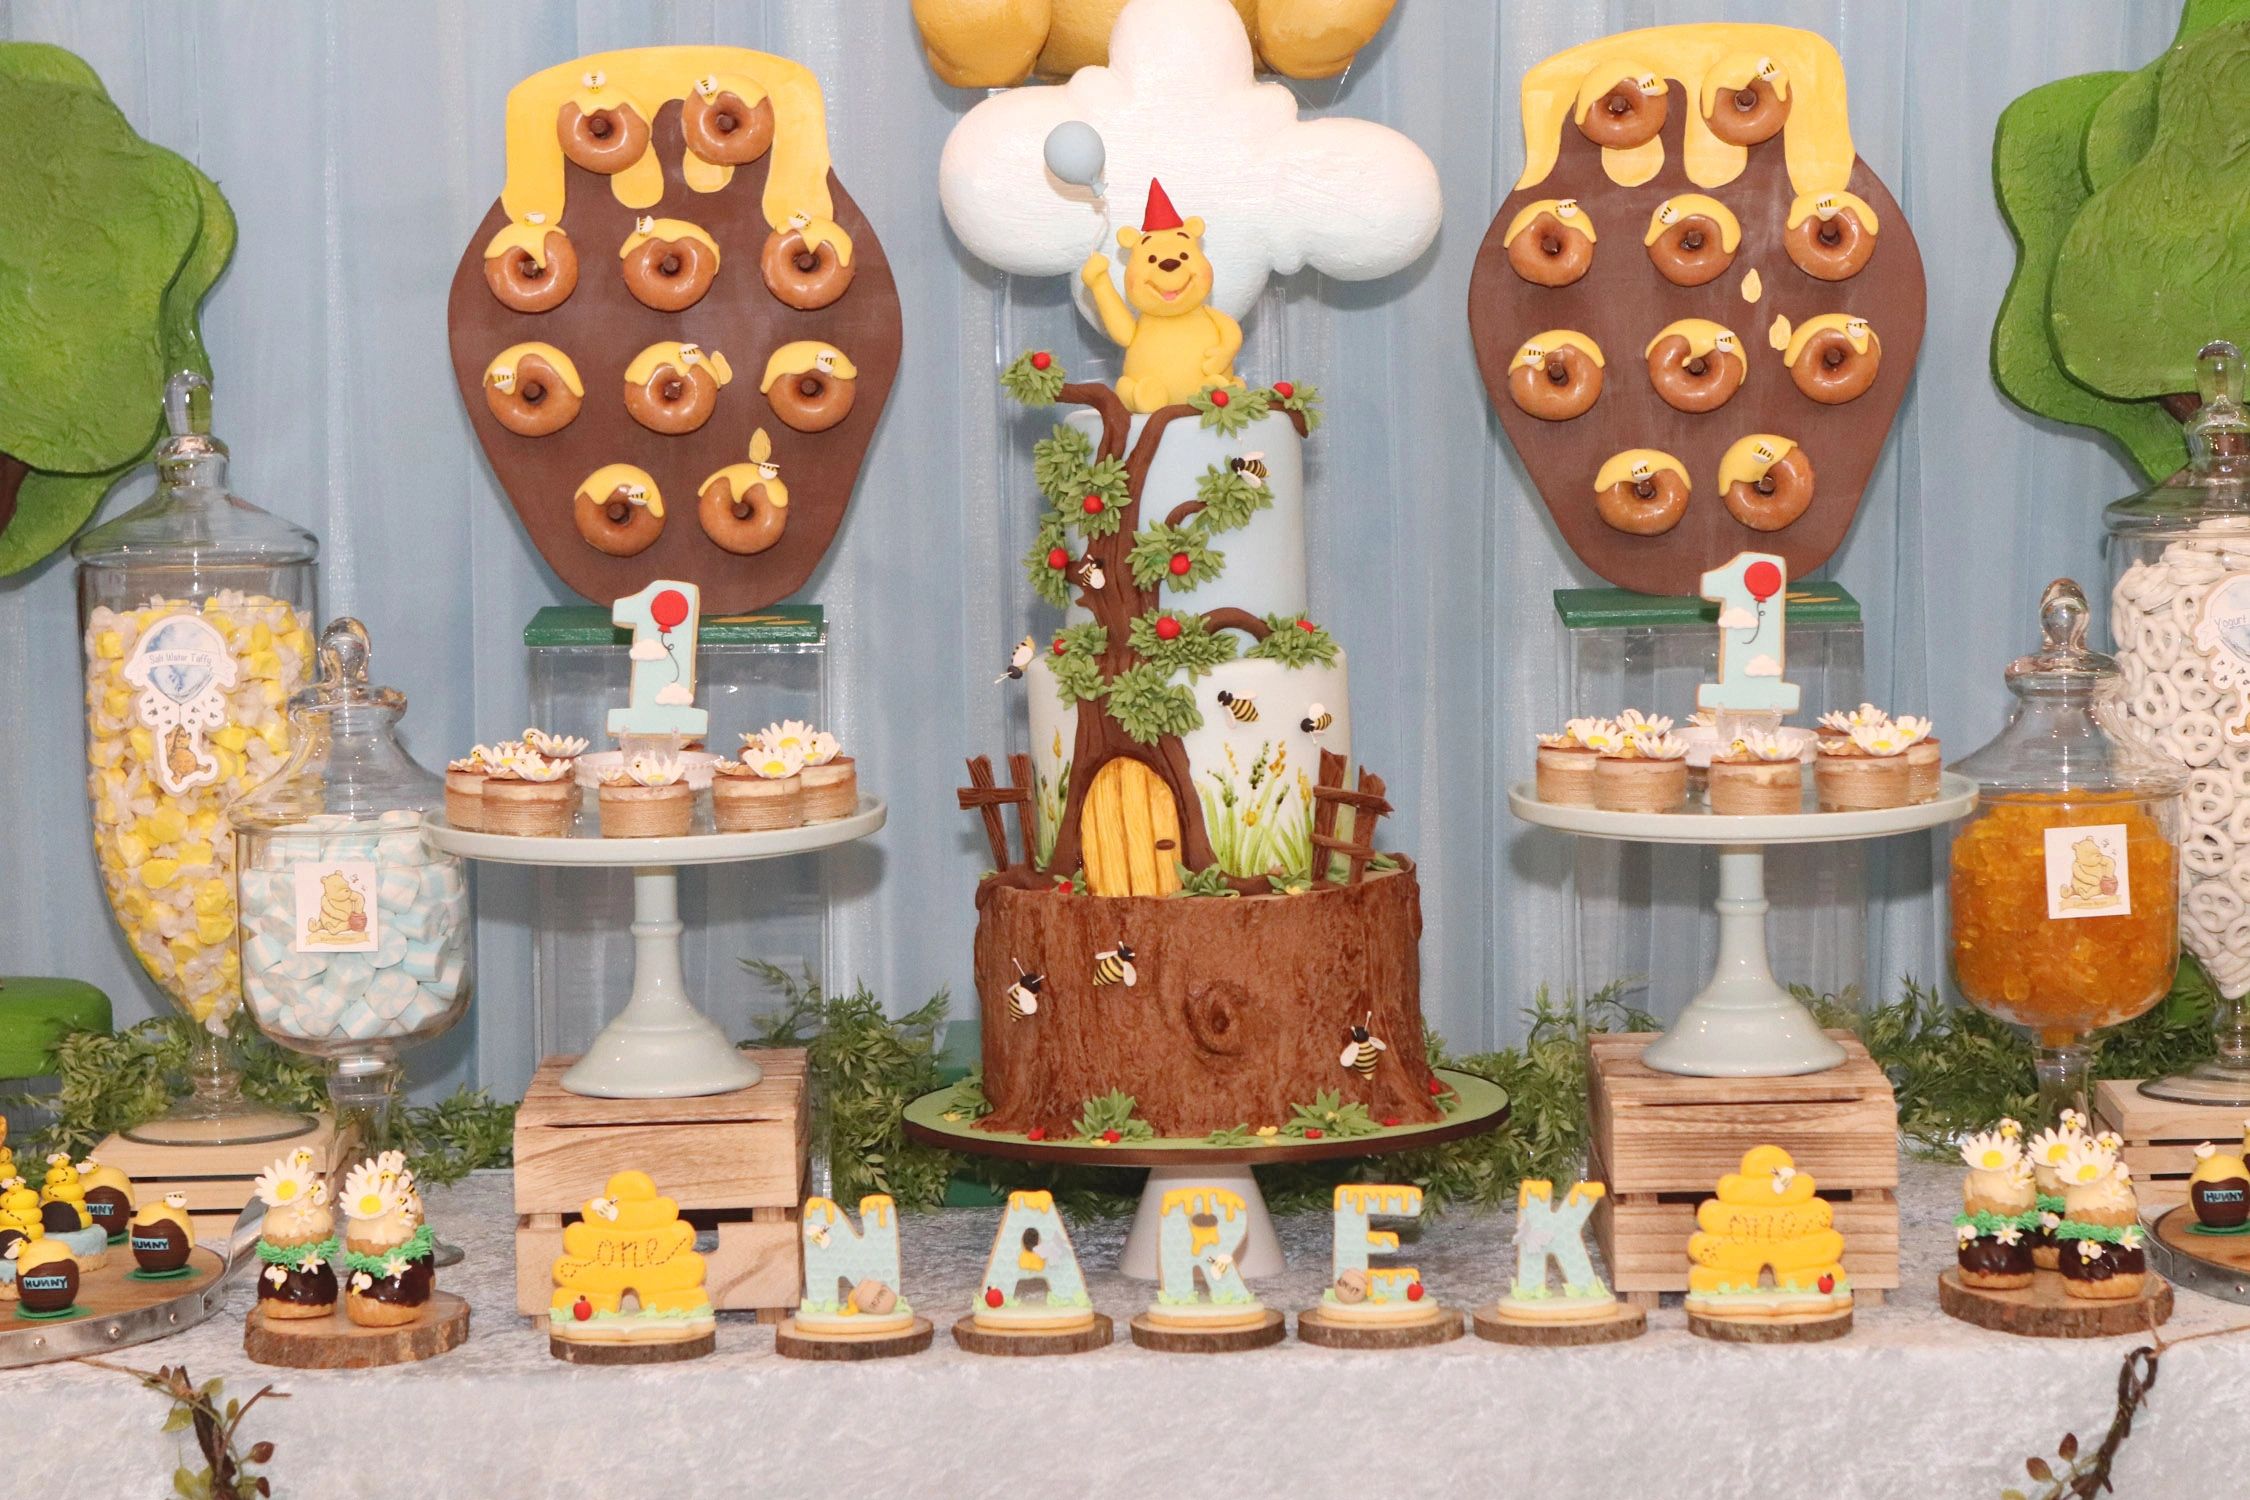 Winnie the Pooh Decorative Baking in Winnie the Pooh Party